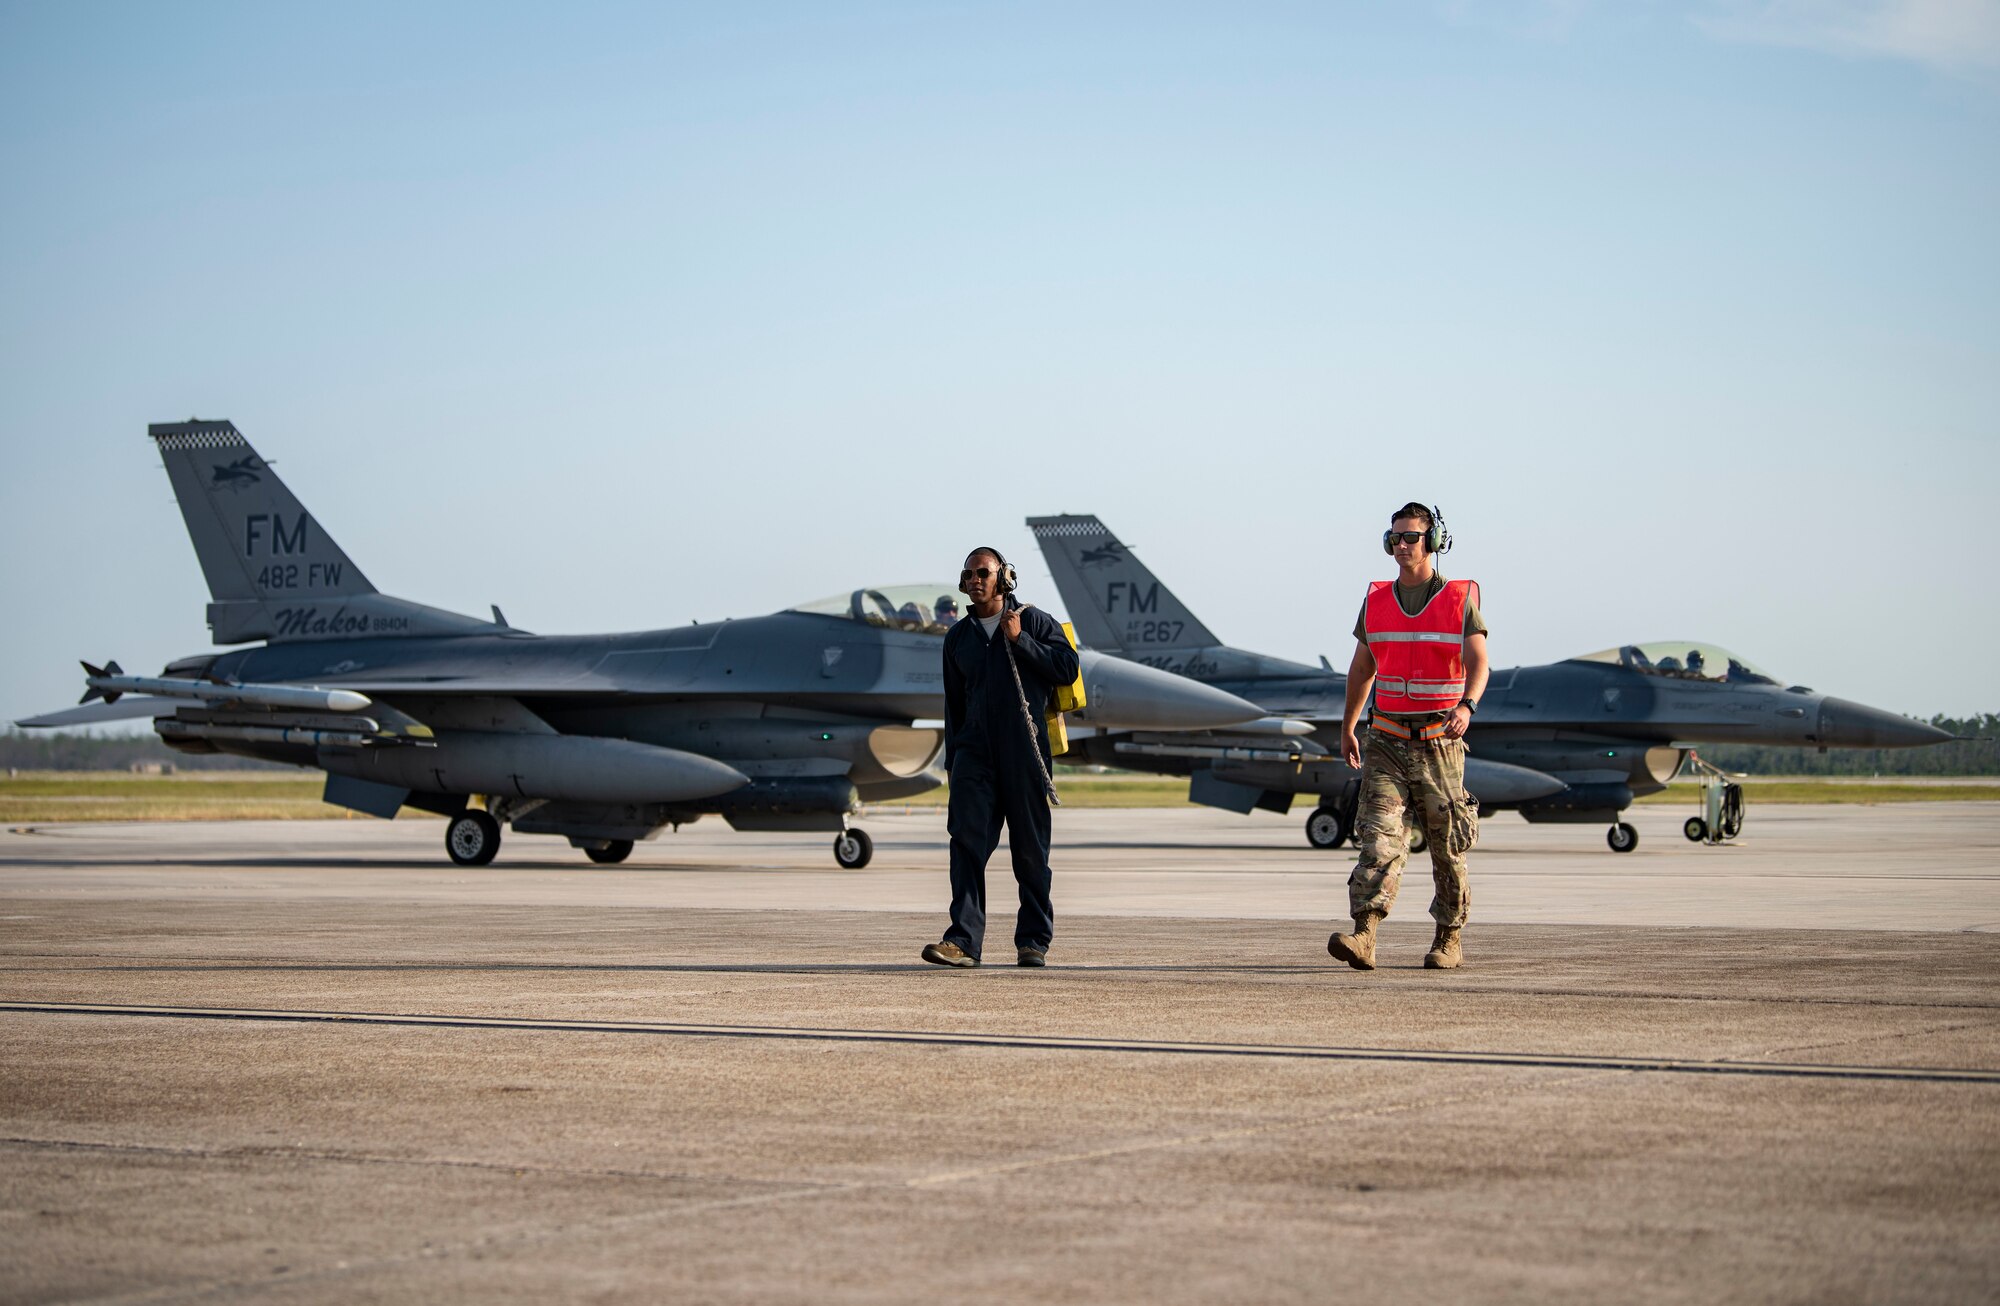 Two tactical aircraft maintainers assigned to the 157th Fighter Squadron walk along the flightline during Combat Archer 19-12 on Tyndall Air Force Base, Fla., Sept. 24, 2019. The F-16 Fight Falcon fighter jets from the 157th FS’s integration acted as alert aircraft and simulated an alert scramble replicating a homeland defense mission.  (U.S. Air Force photo by Airman 1st Class Bailee A. Darbasie)